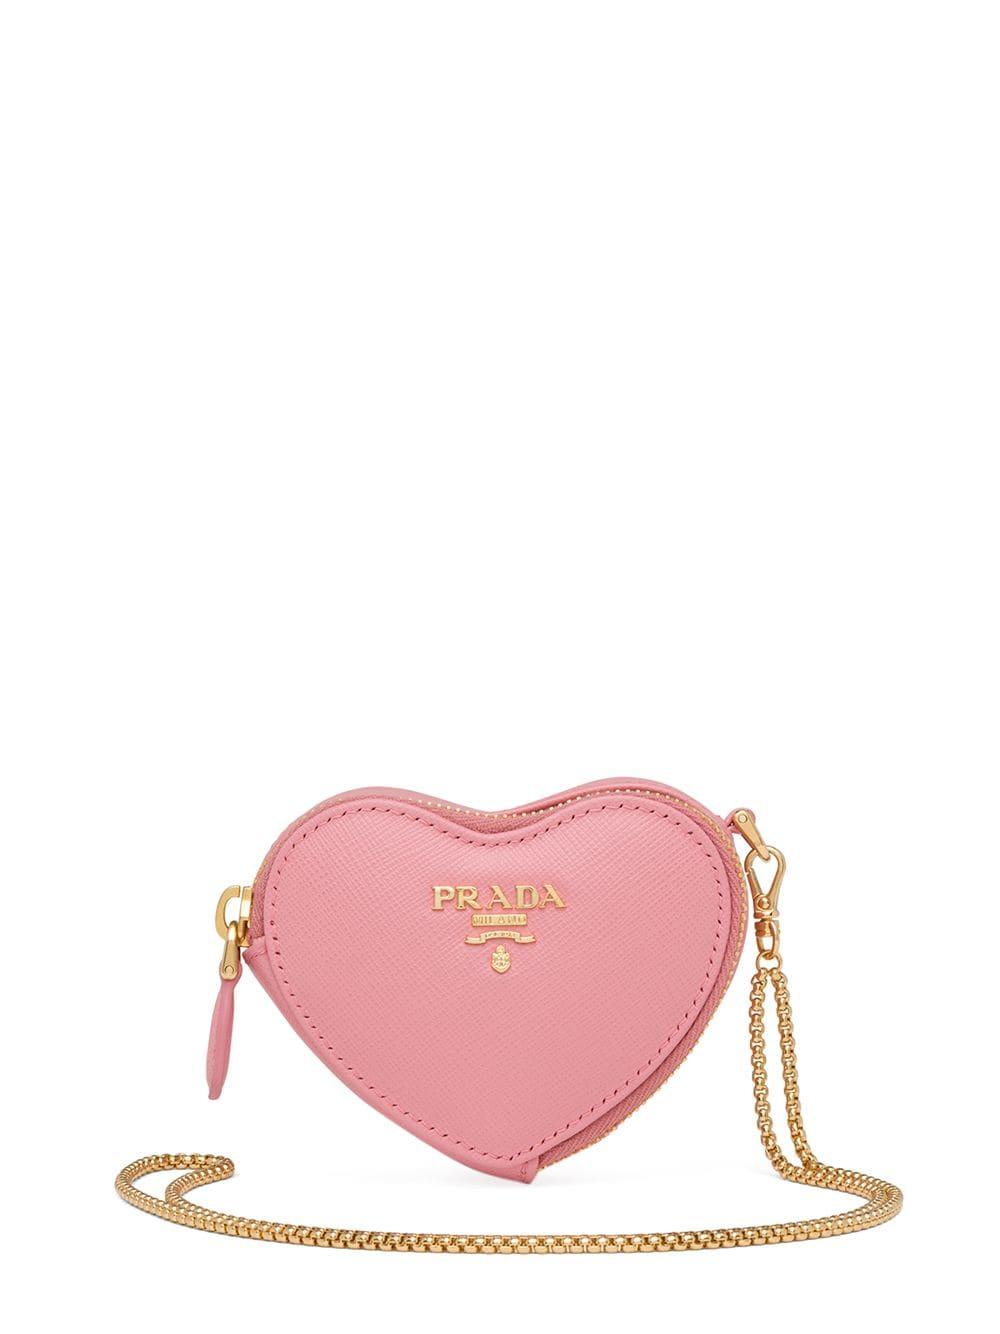 Prada Leather Heart Shaped Wallet On Chain in Pink - Lyst